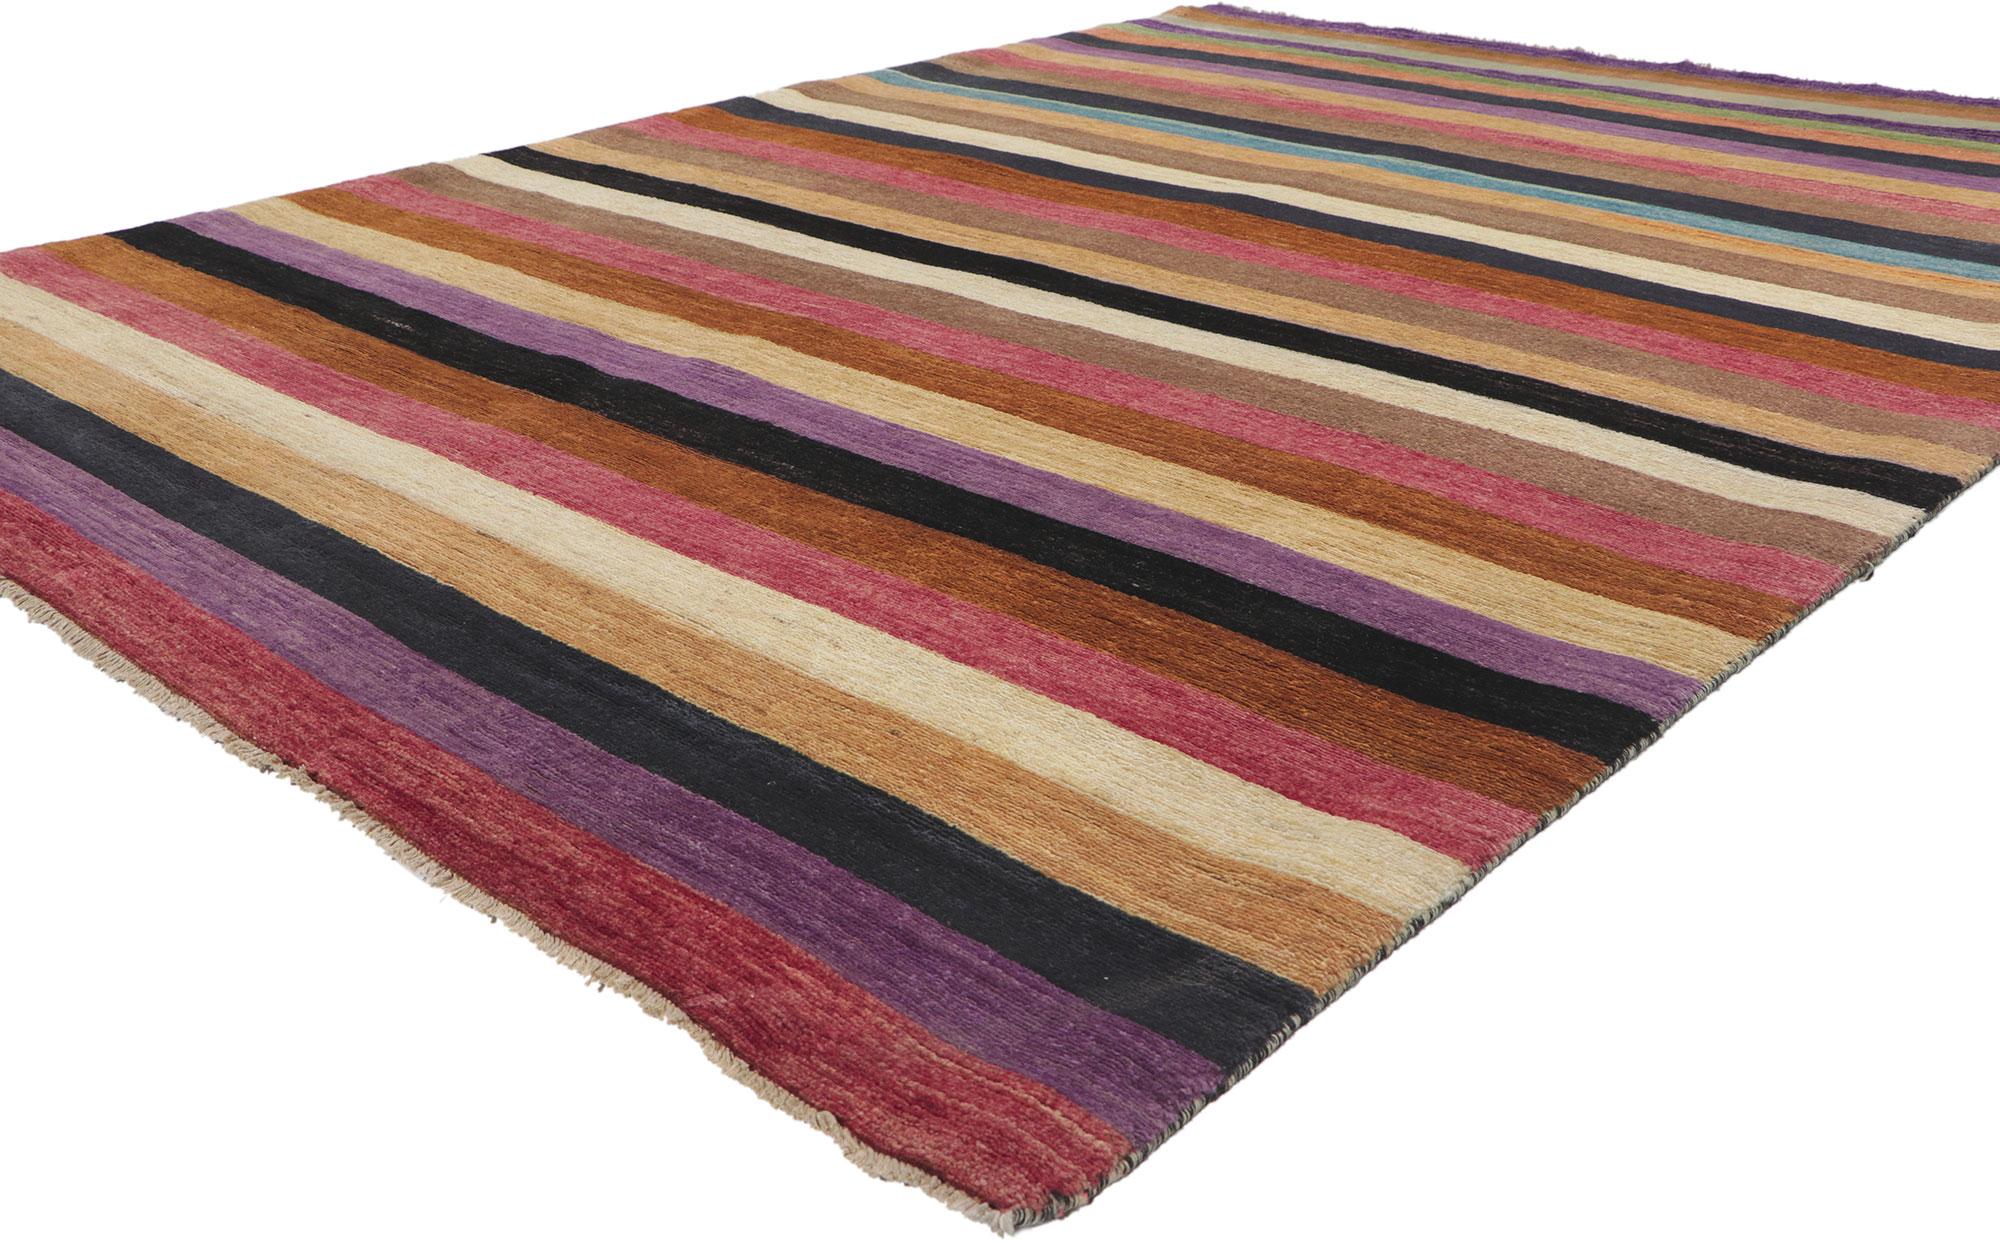 80746 Modern striped area rug, 06'02 x 08'08.
?Showcasing colorful stripes, incredible detail and texture, this hand knotted wool modern area rug is a captivating vision of woven beauty. The eye-catching striped pattern and lively colors woven into